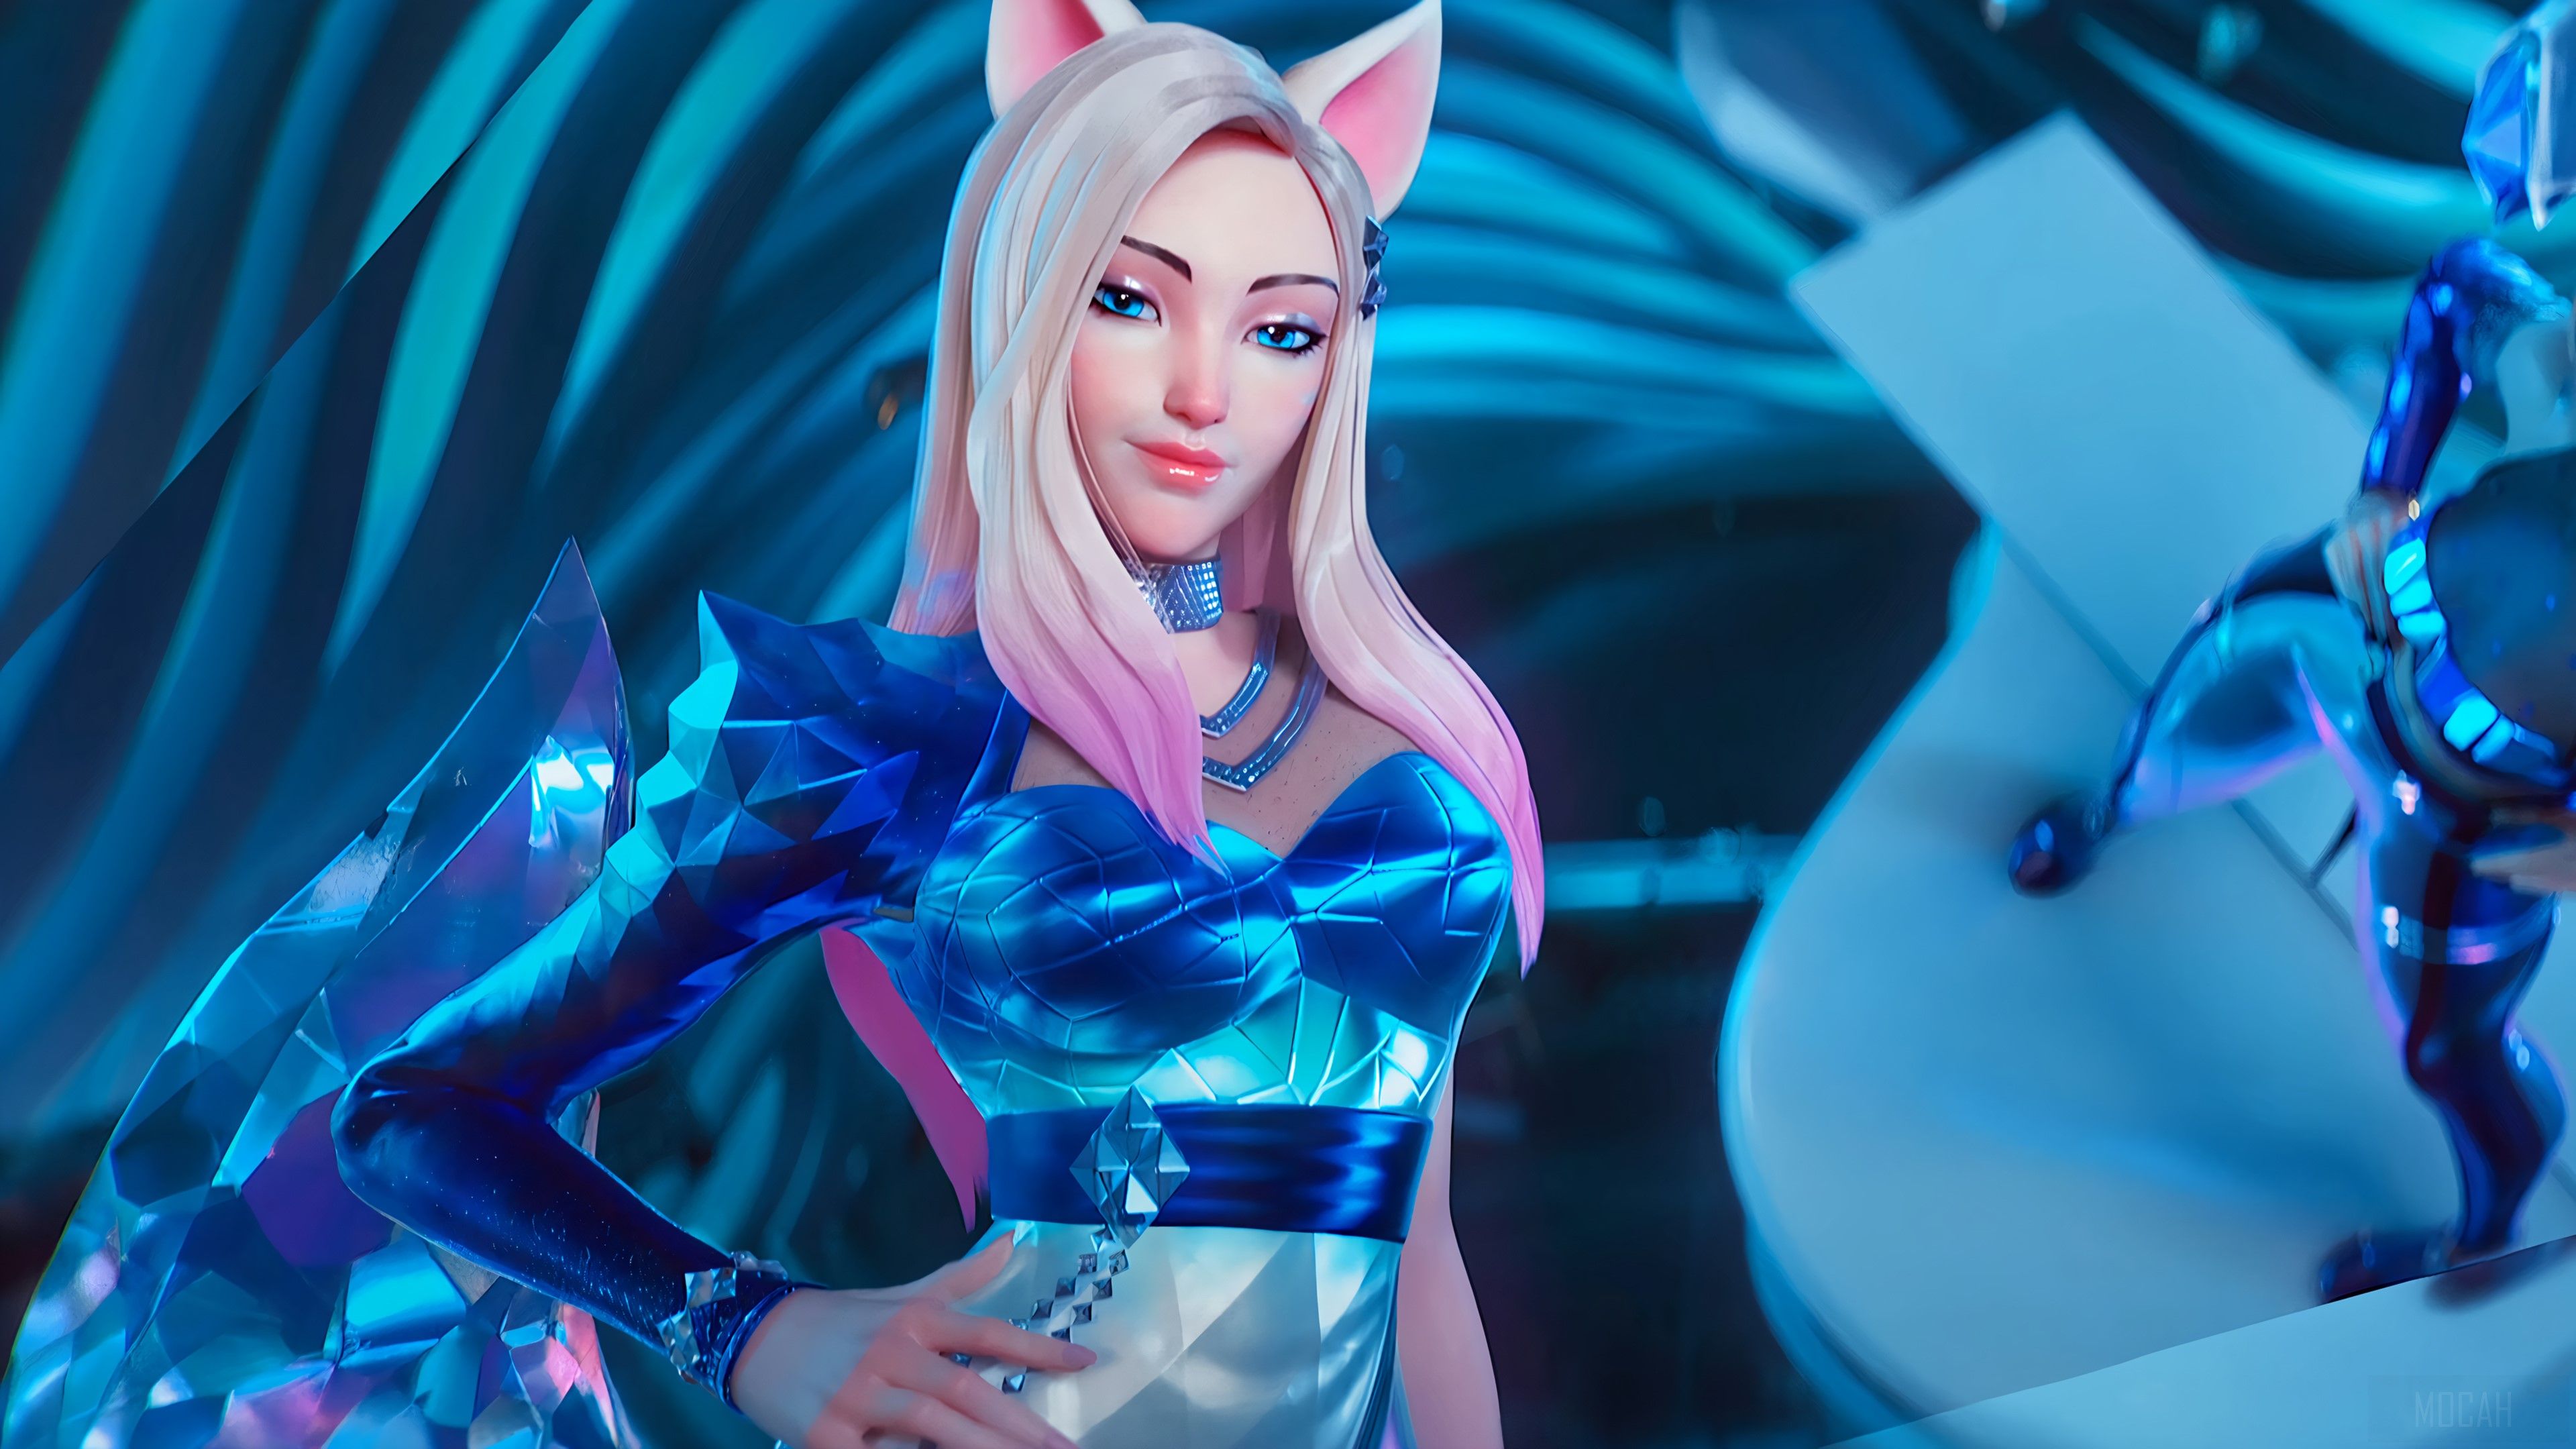 Ahri is a playable character in the popular online game League of Legends. She is known for her blonde hair and seductive charm.
2. Ahri - Champions - Universe of League of Legends - wide 5